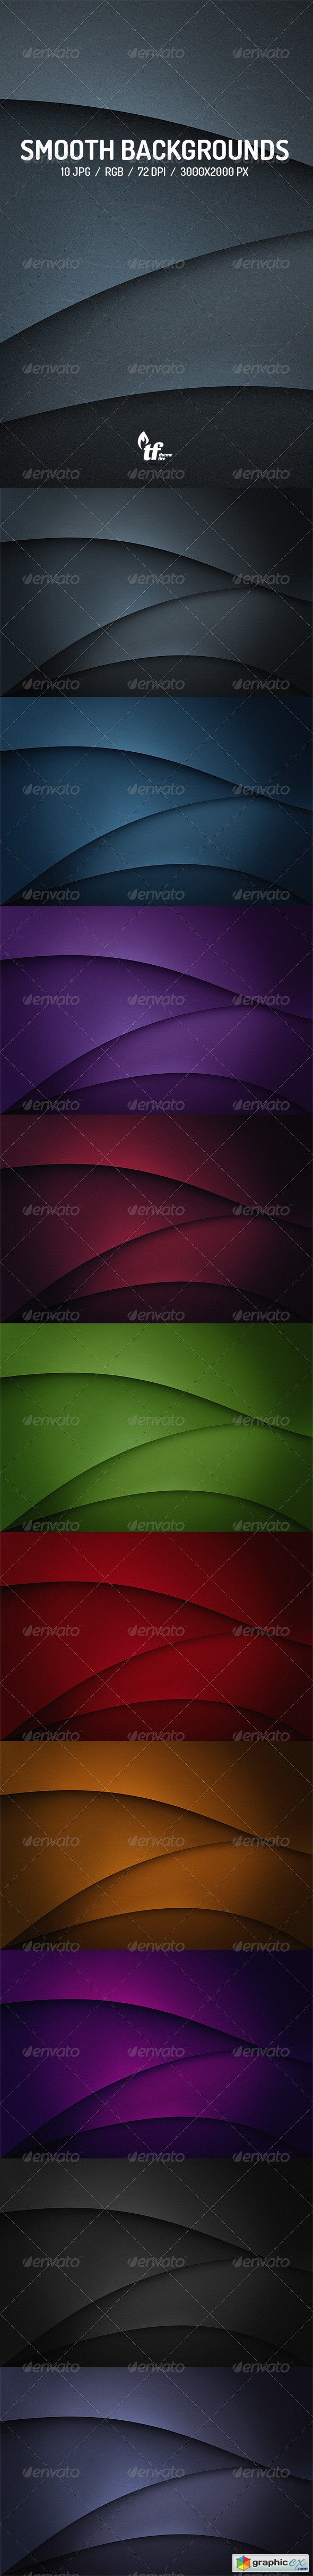 Flat Smooth Flow Backgrounds